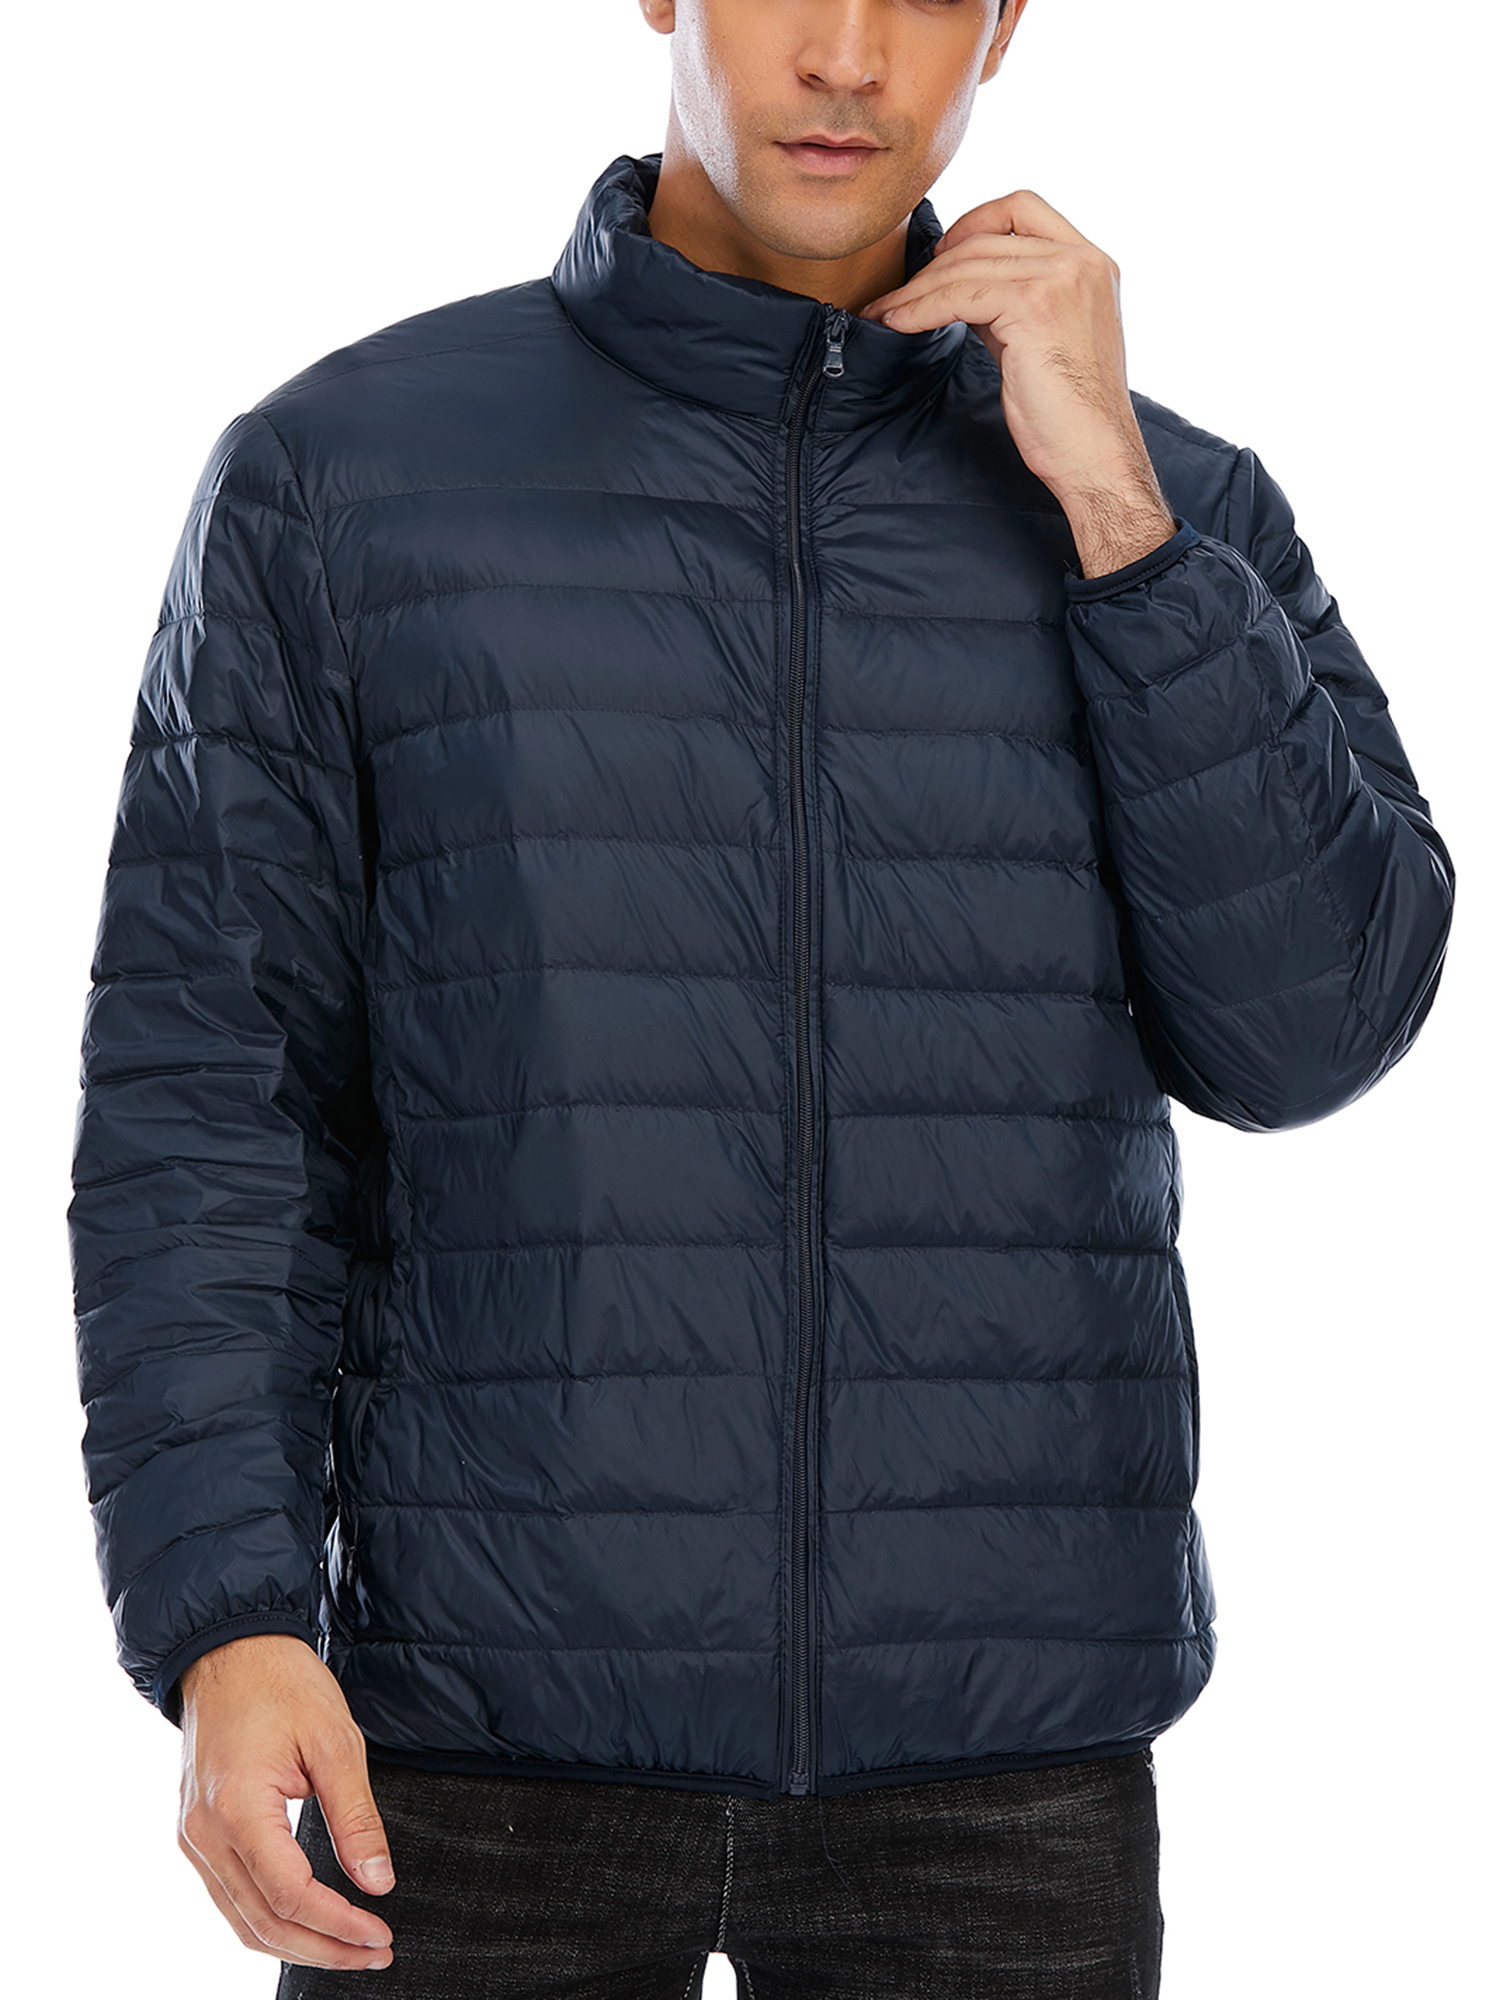 SAYFUT Men's Lightweight Down Jacket Puffer Bubble Coat Packable Warm Puffer Down Zipper Coat Water Resistant  Big and Tall Size S-2XL - image 5 of 8